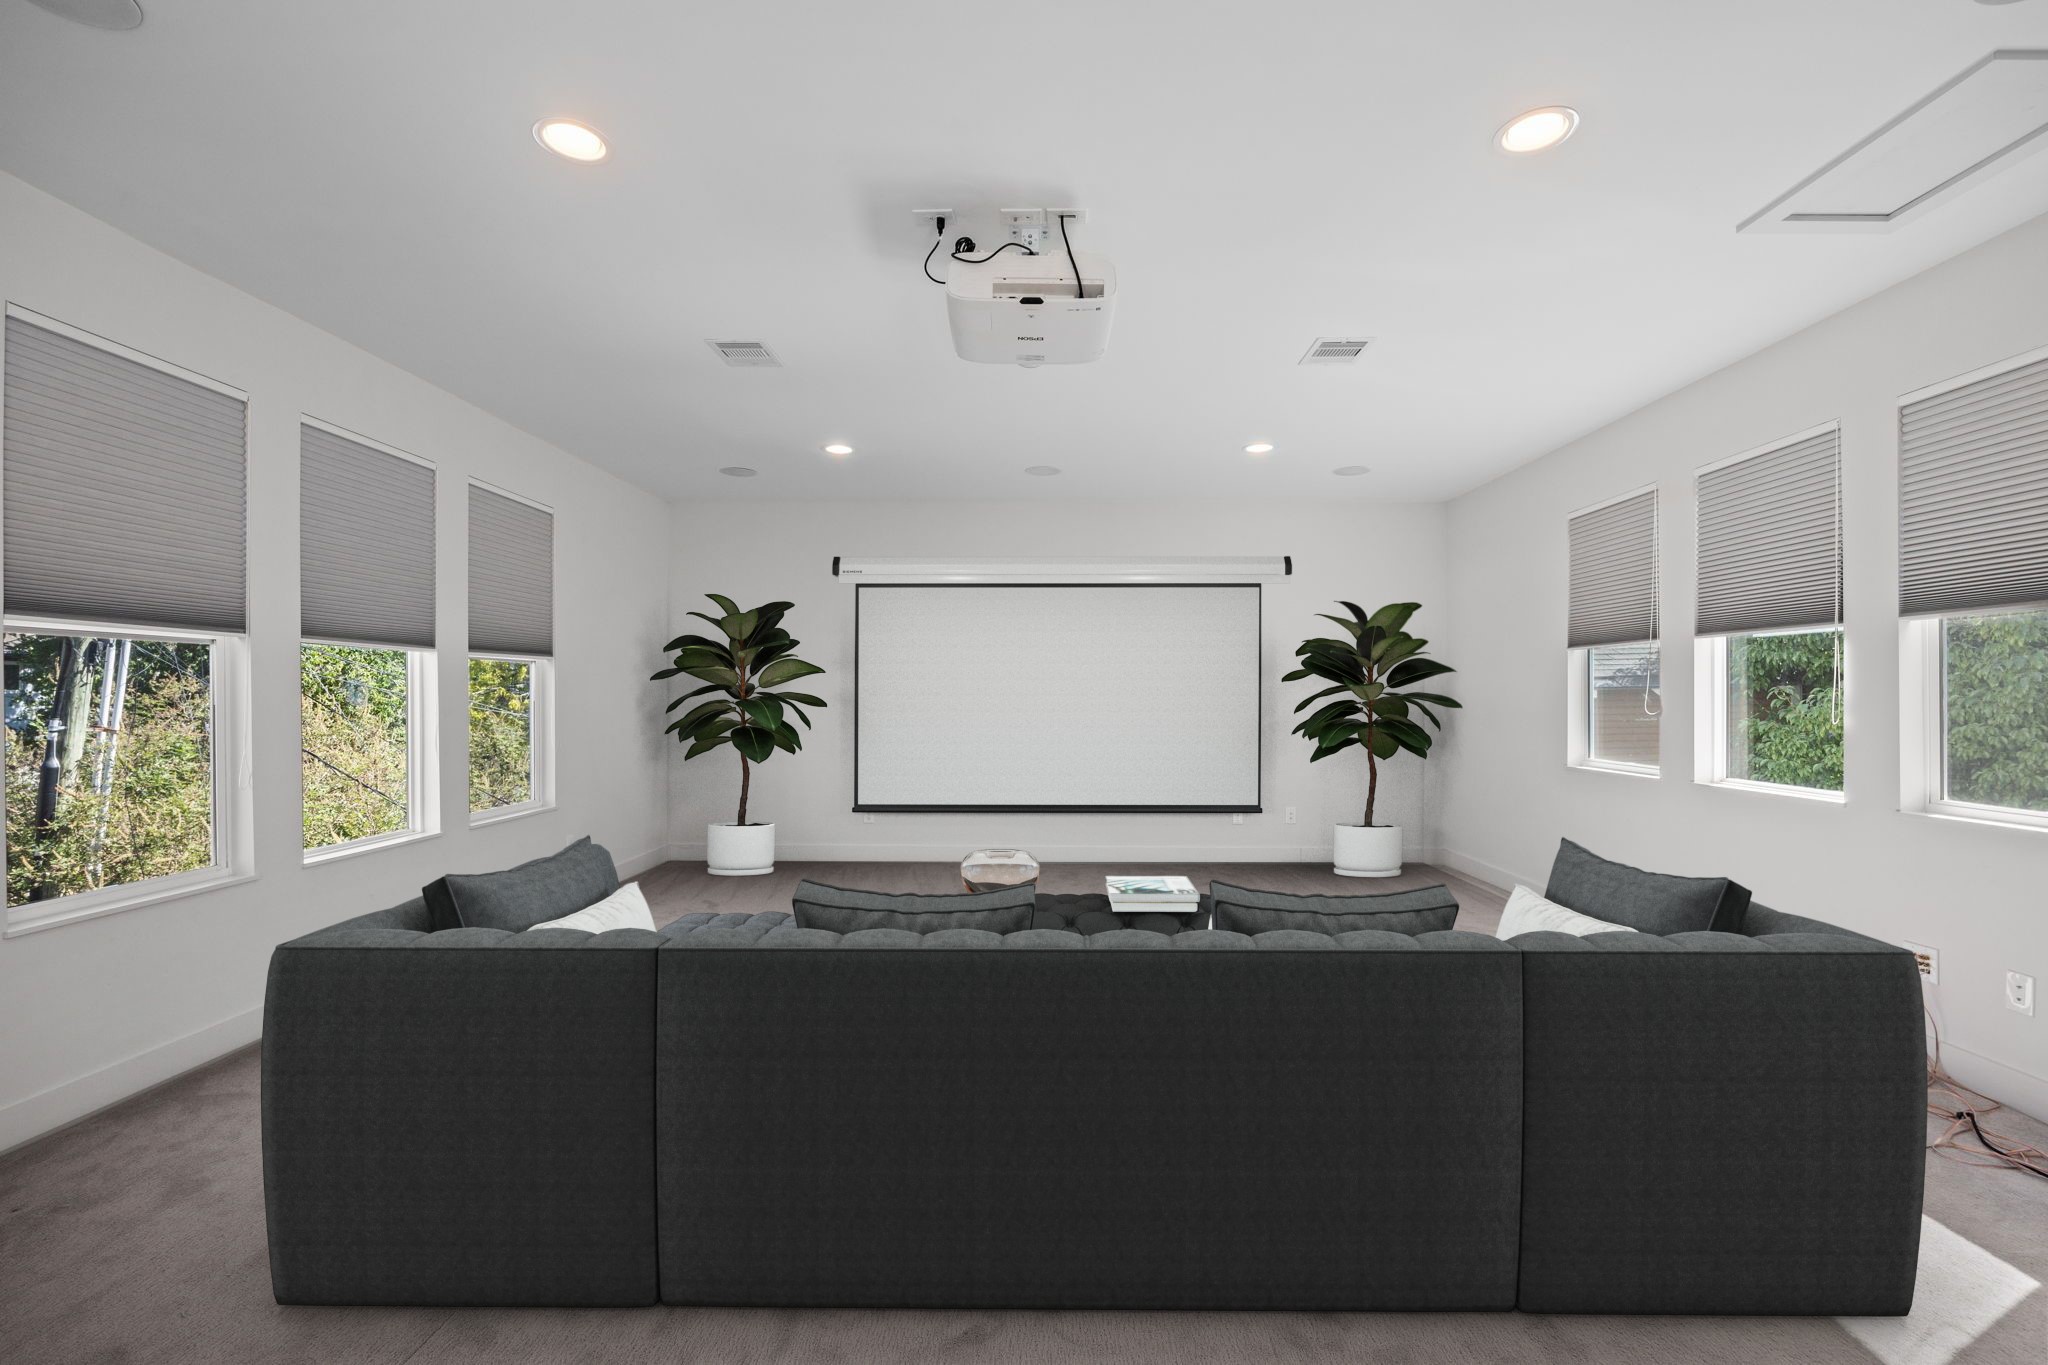 The other side of the room features an included projector and could be used as a movie room.